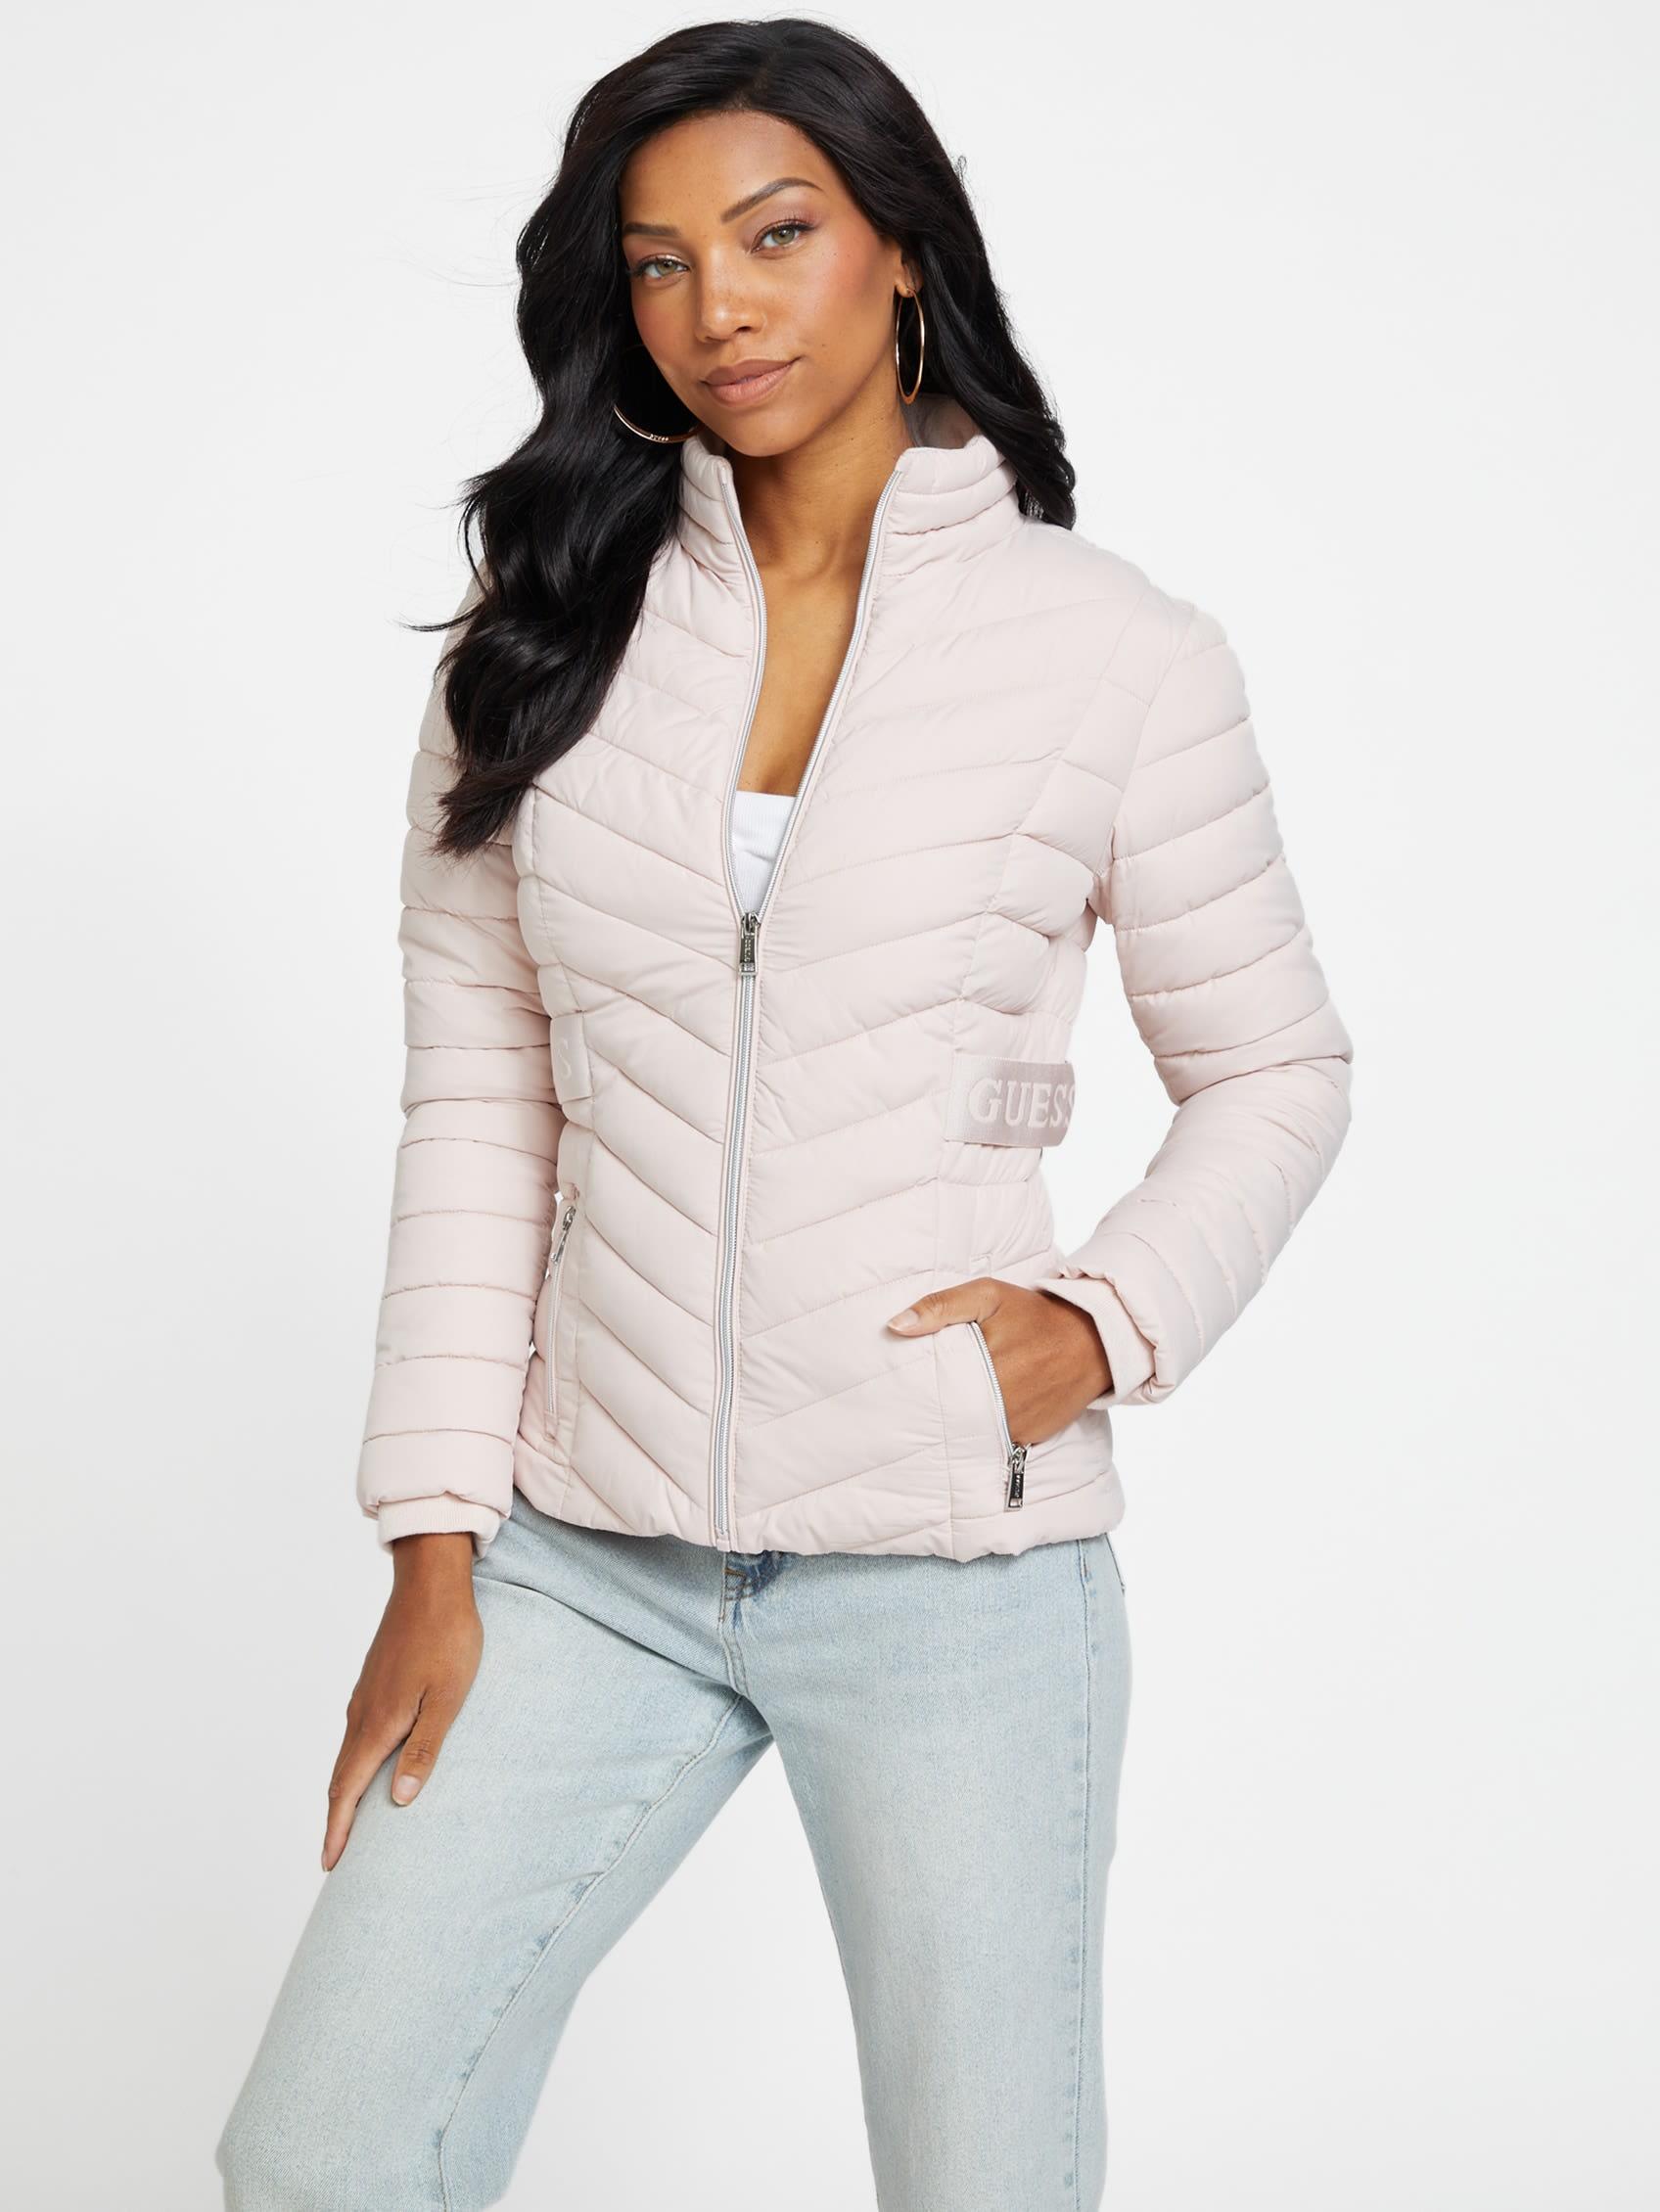 Guess Factory Aalcon Puffer Jacket in White | Lyst